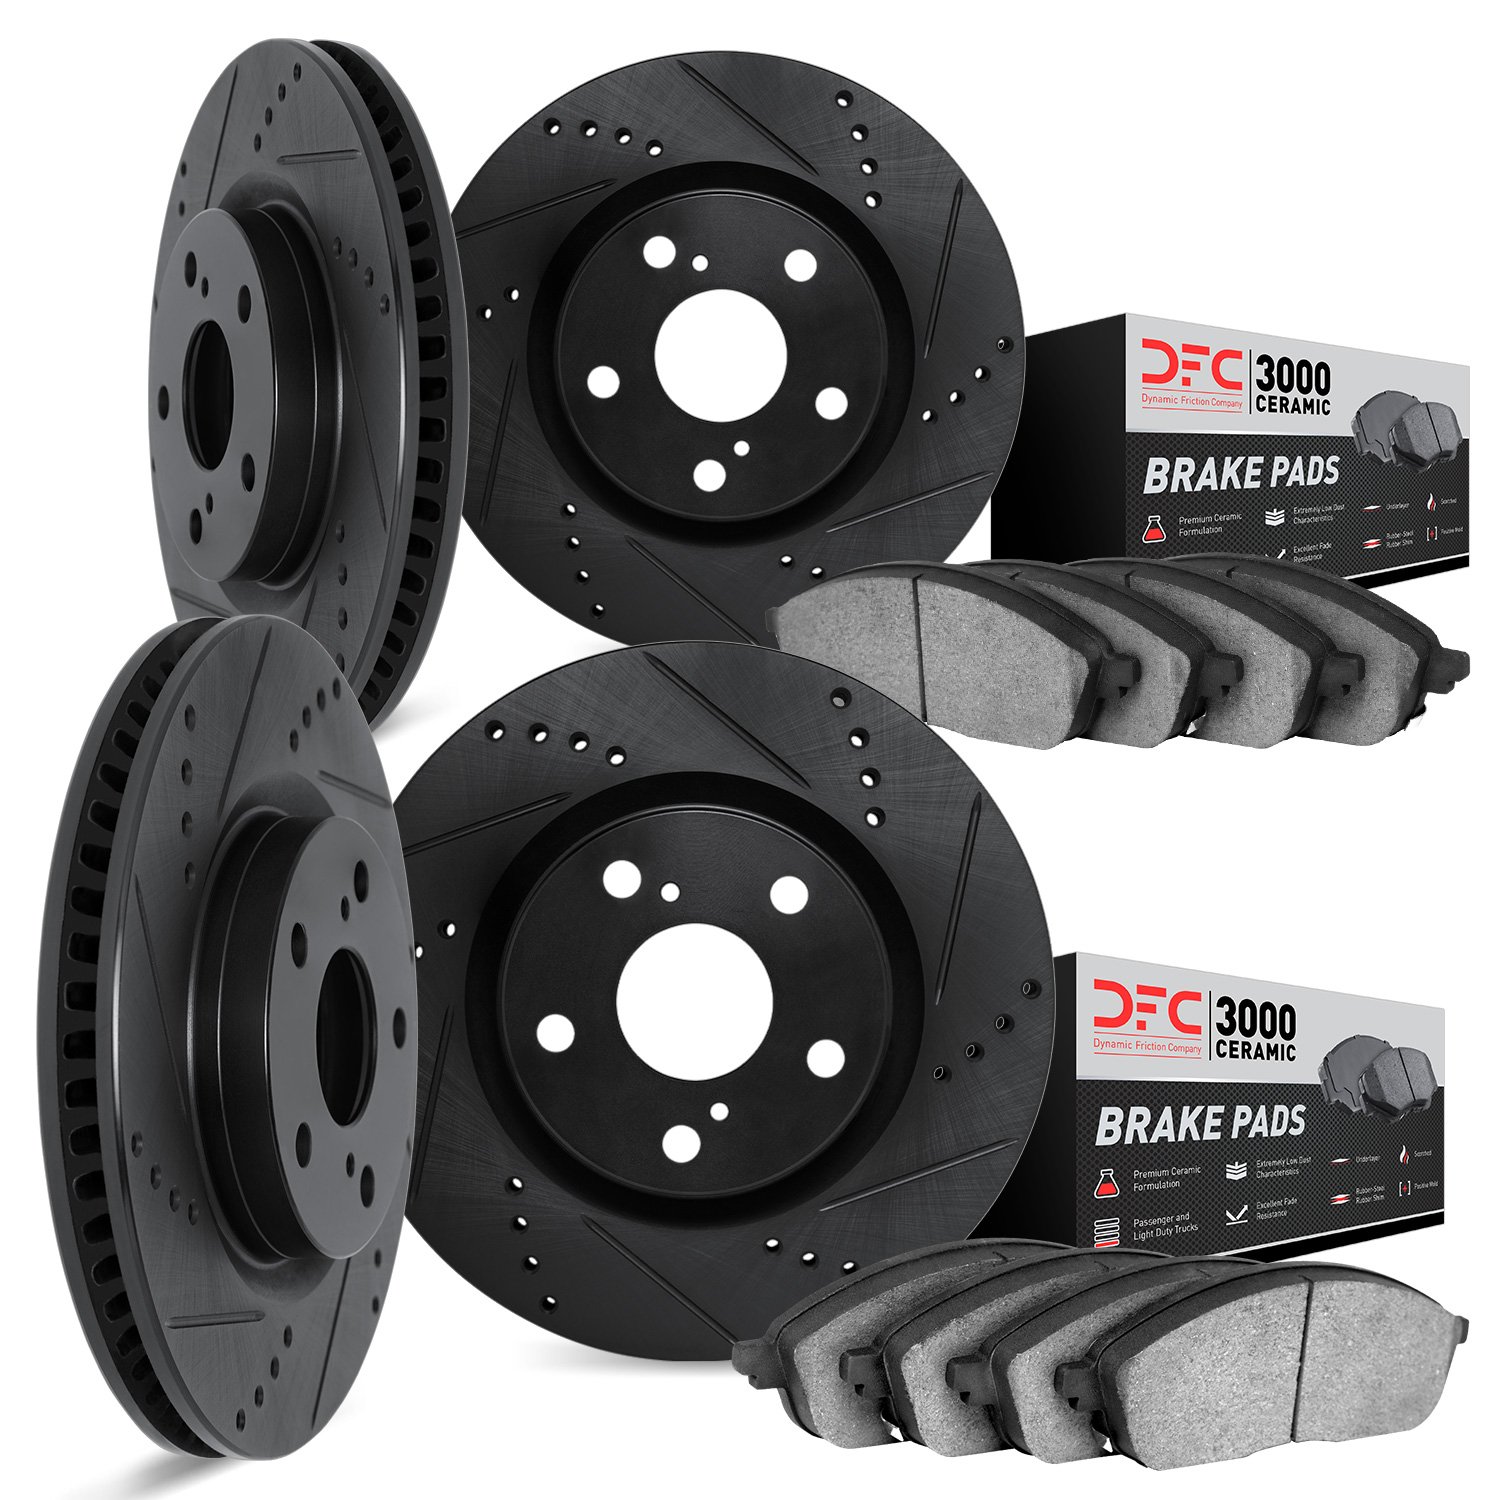 8304-45009 Drilled/Slotted Brake Rotors with 3000-Series Ceramic Brake Pads Kit [Black], 1998-2002 GM, Position: Front and Rear